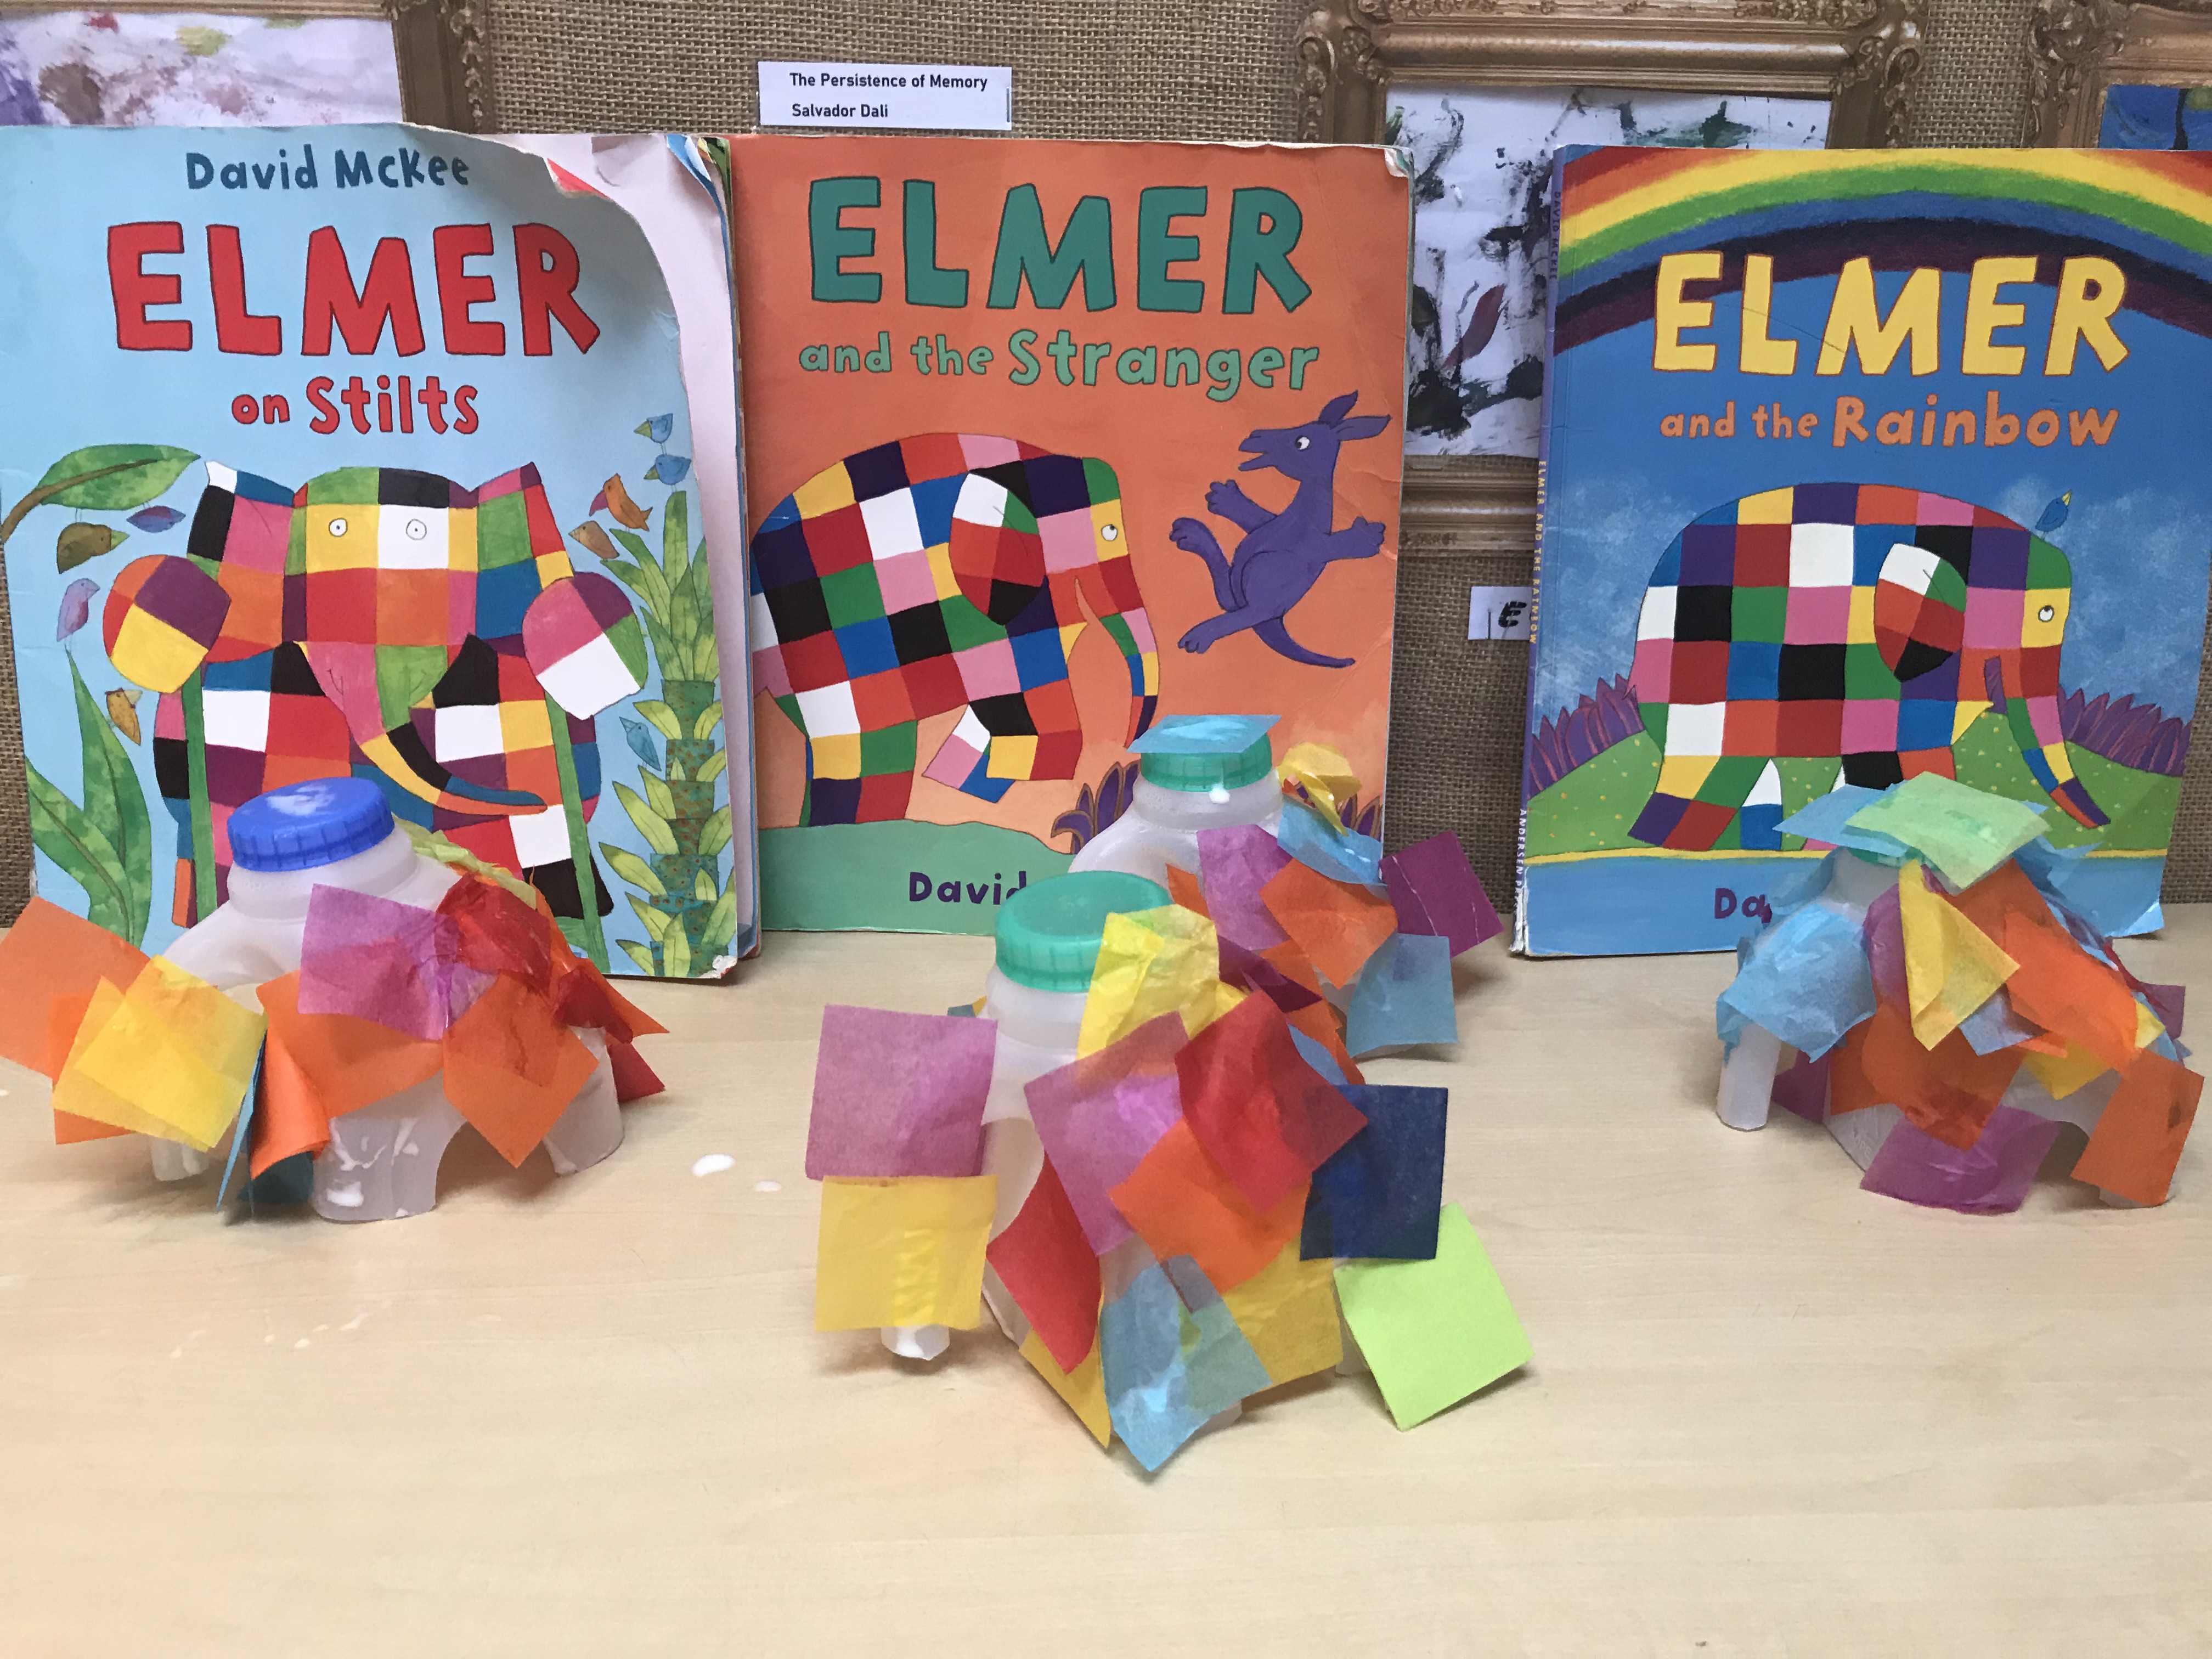 Elmer's Glue-All and Wood Glue • Ugly Duckling House